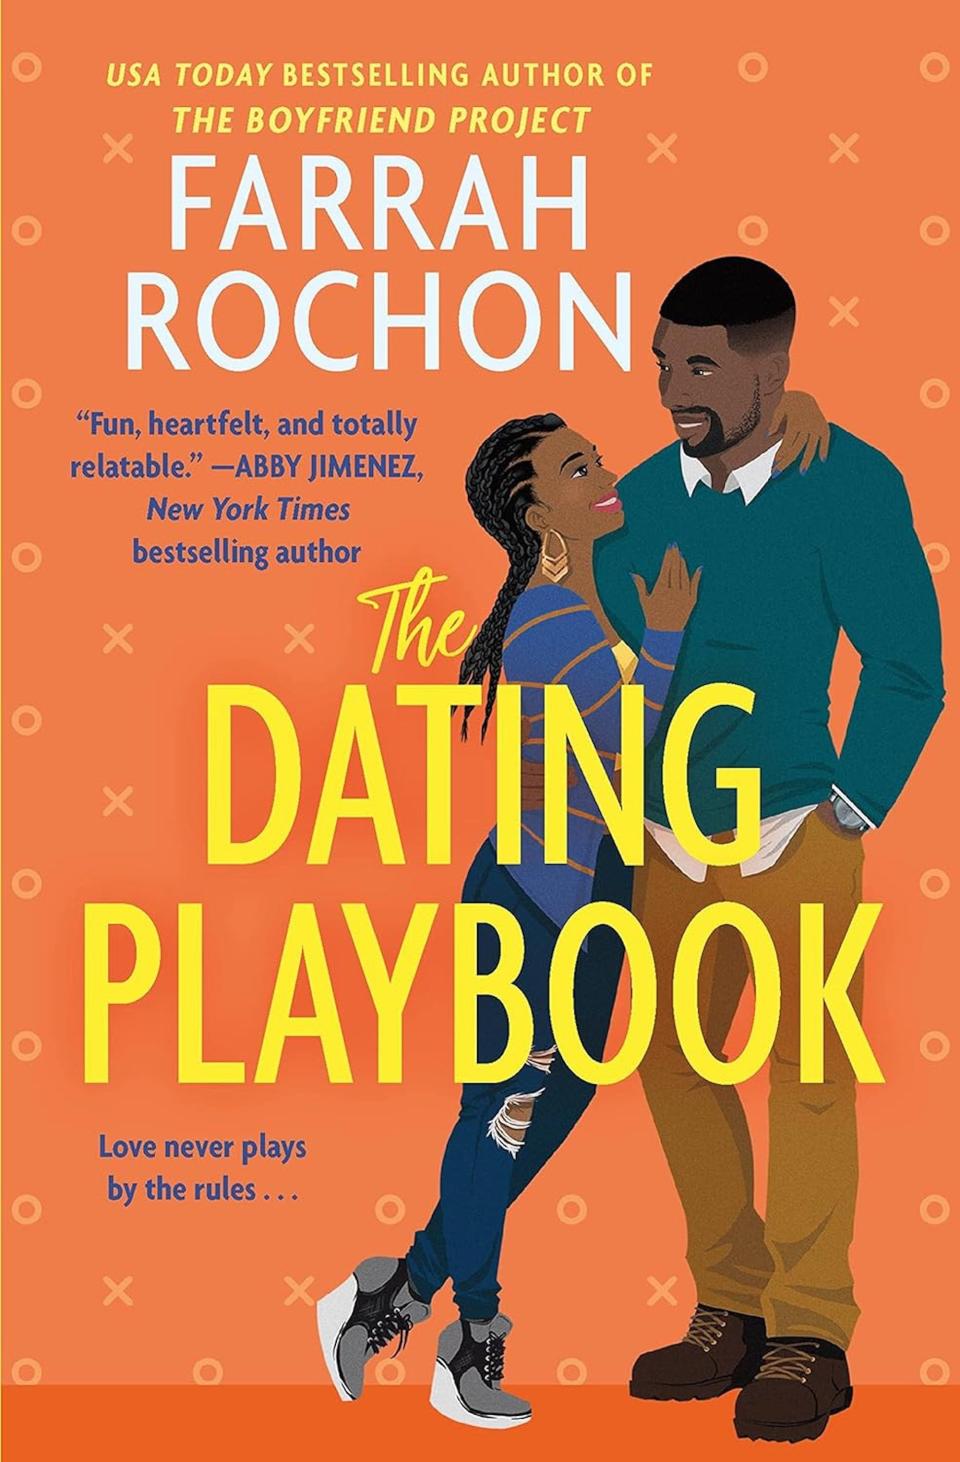 "The Dating Playbook" by Farrah Rochon